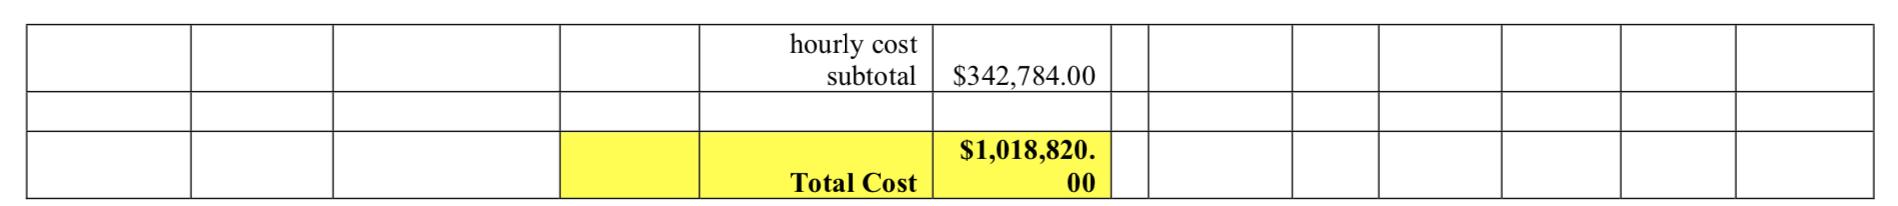 hourly cost subtotal $342,784.00 $1,018,820. 00 Total Cost